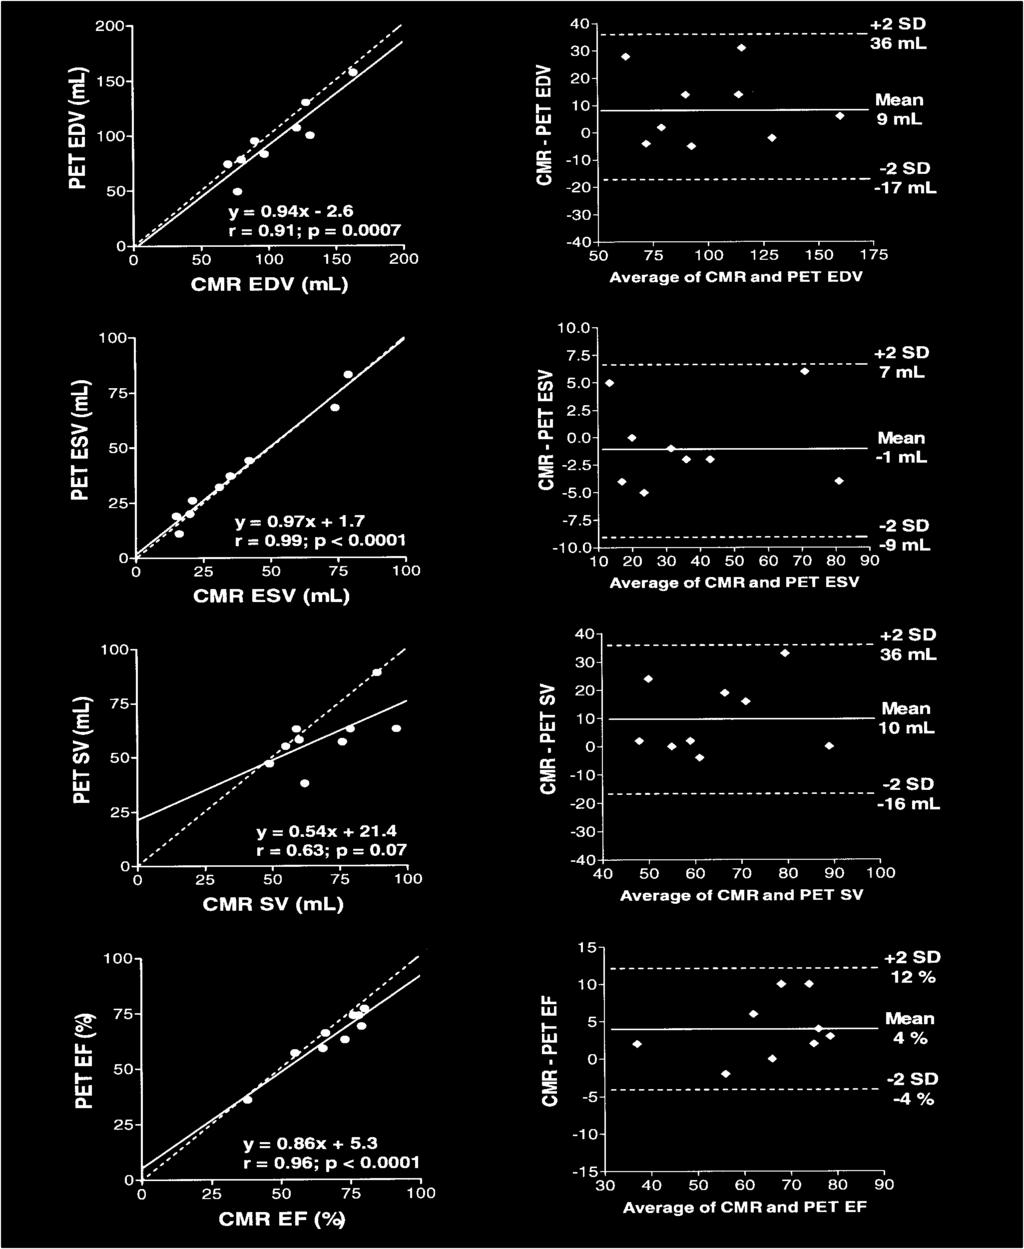 FIGURE 1. Scatterplots and Bland Altman plots for left ventricular parameters measured with CMR and PET.